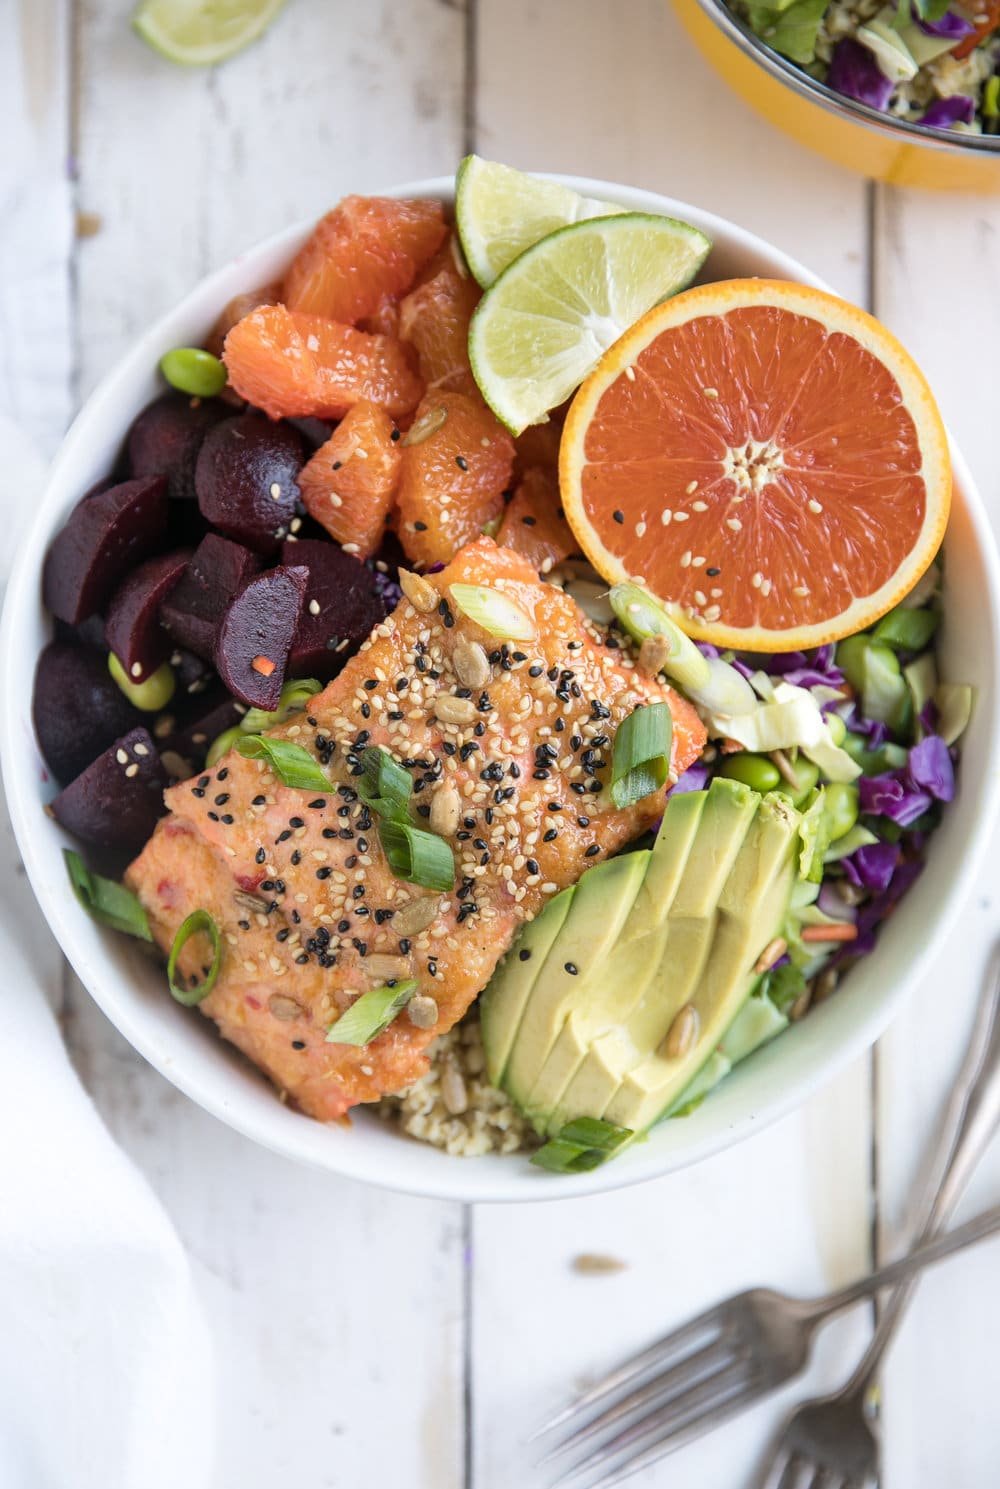 Super healthy foods like freekeh, beets, oranges, and avocado are just part of what make this nutritious 30 minute Sweet Chili Miso Salmon Salad a dinner win any night of the week!